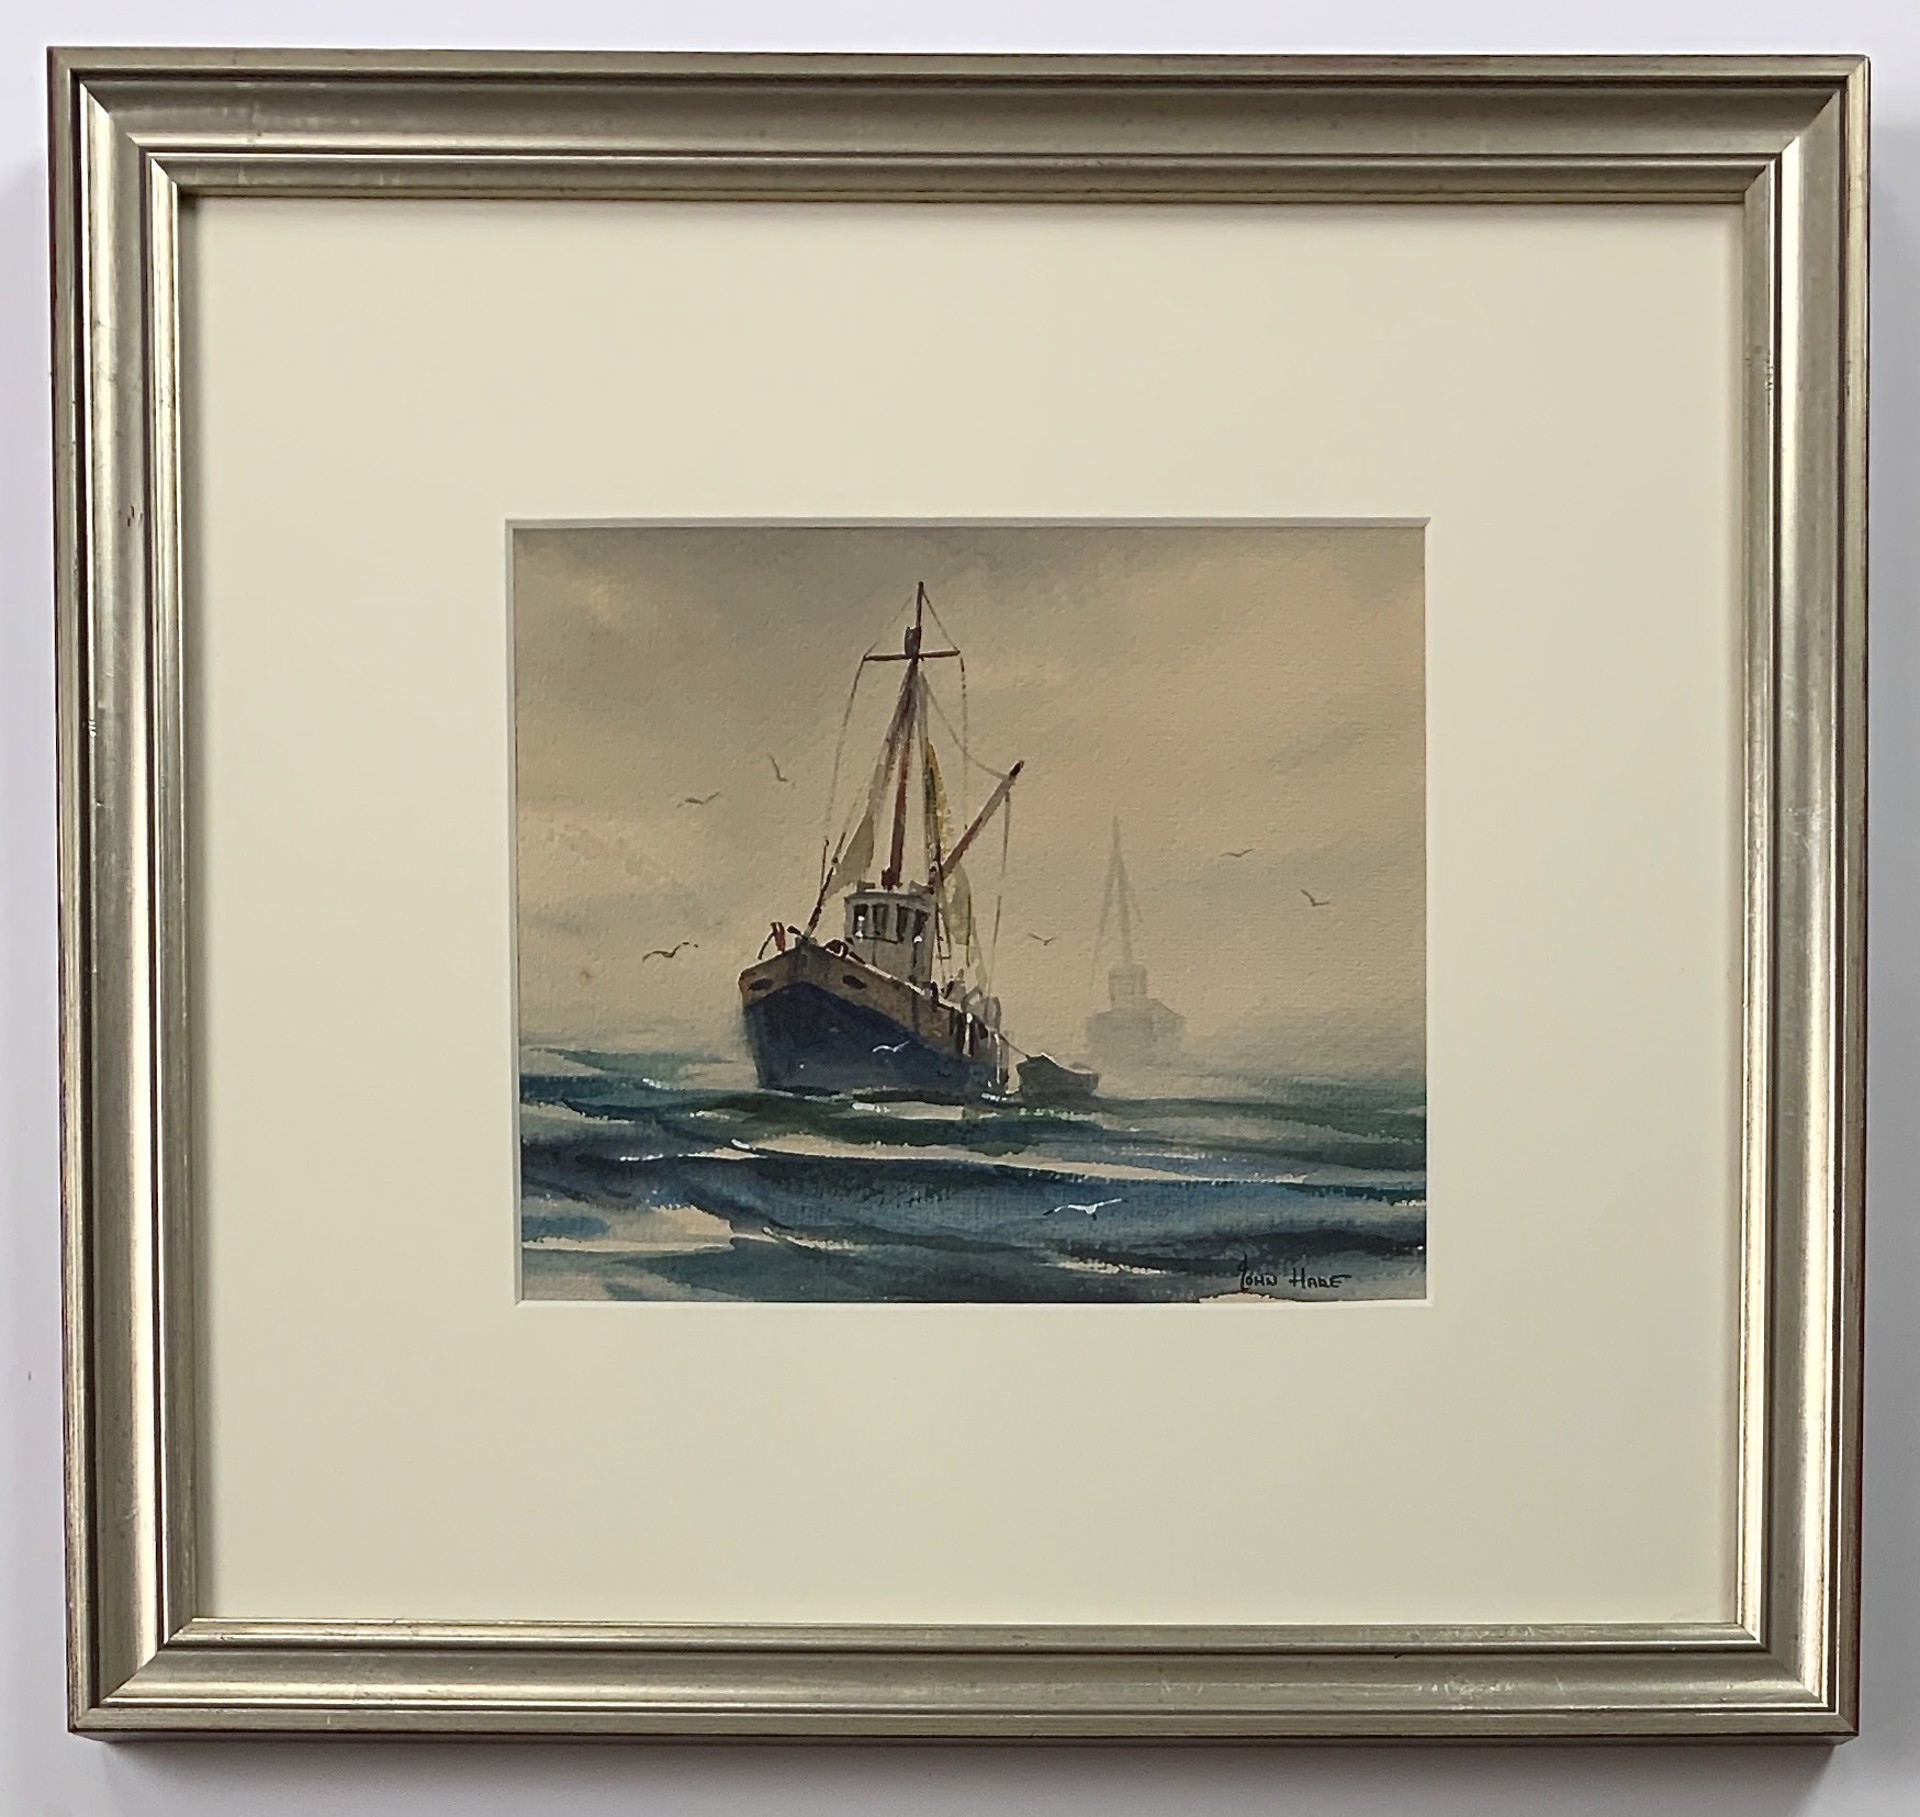 Boat at Sea by John Cuthbert Hare